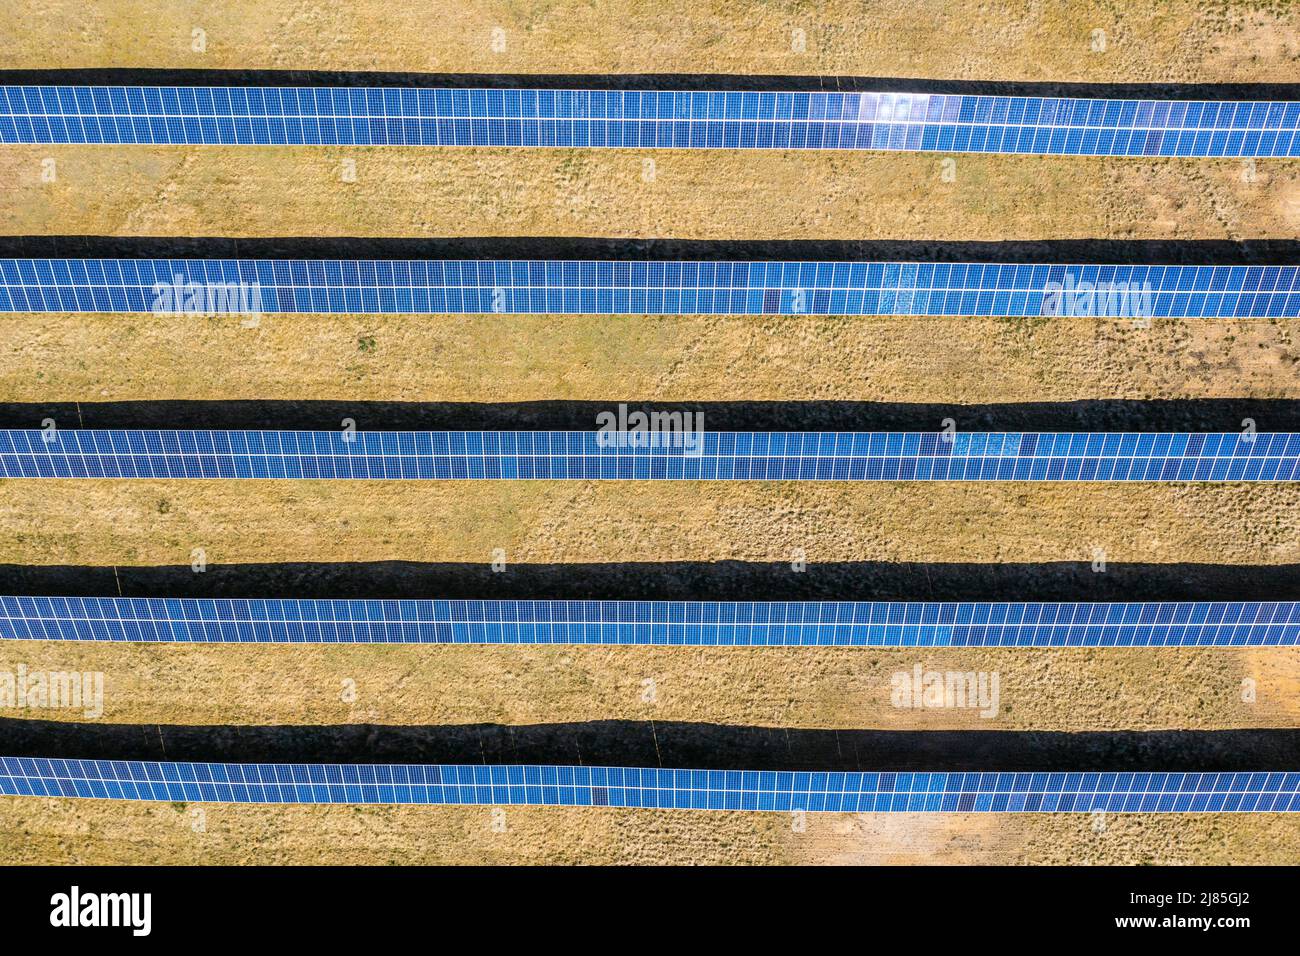 Solar farm aerial view, rows of PV panels by a small house Stock Photo